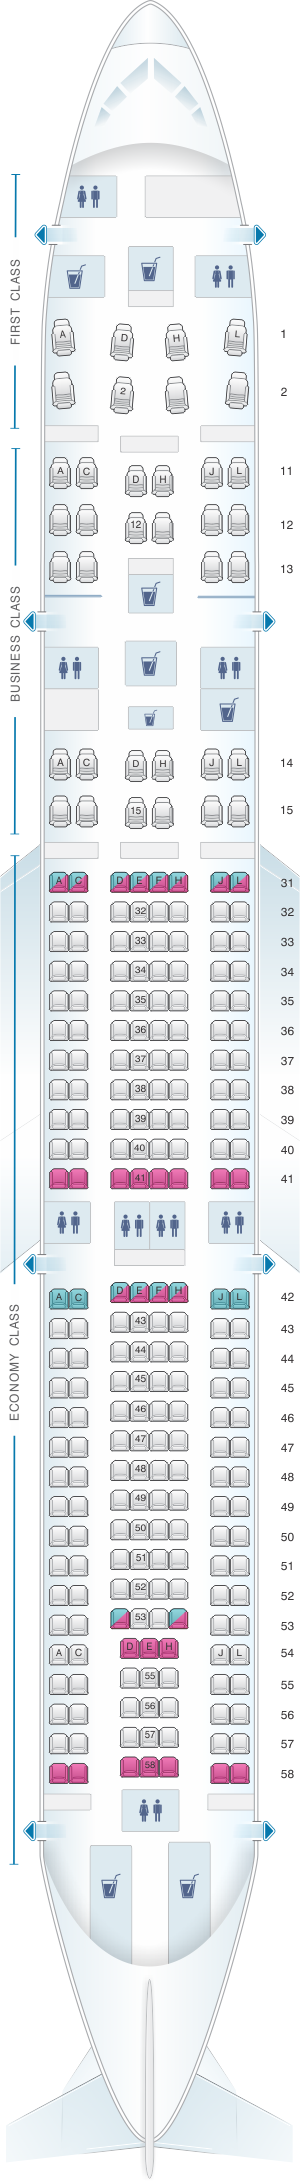 Seat Map Air China Airbus A340 300 | SeatMaestro